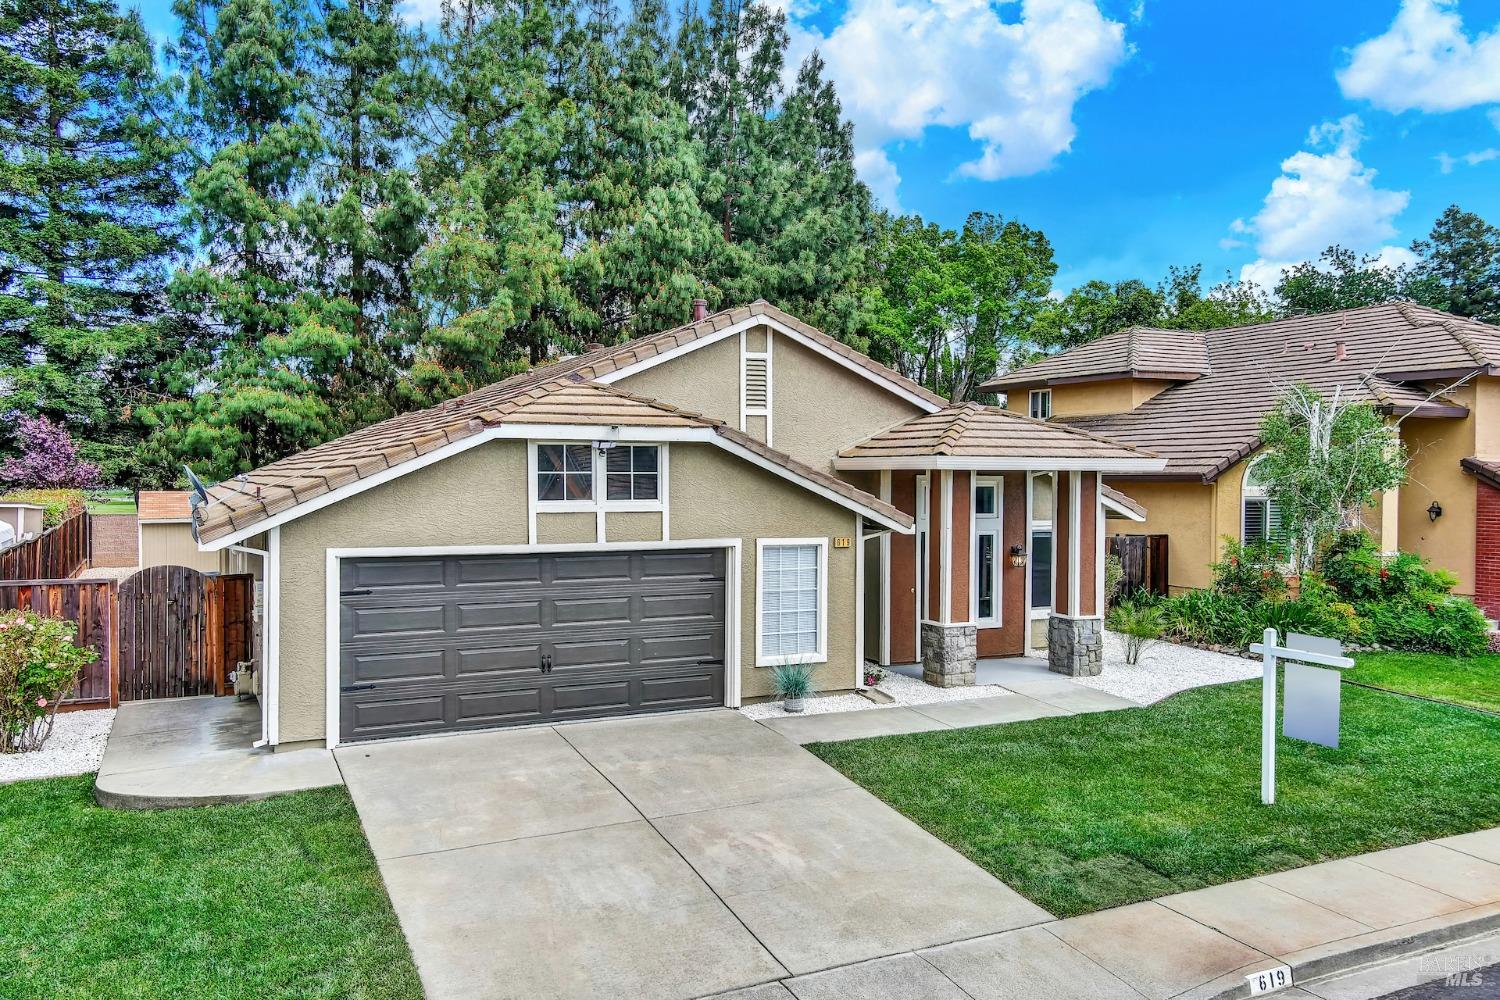 Welcome home to this desirable 4 bedroom 2 bath single story nestled in the highly sought-after Coop